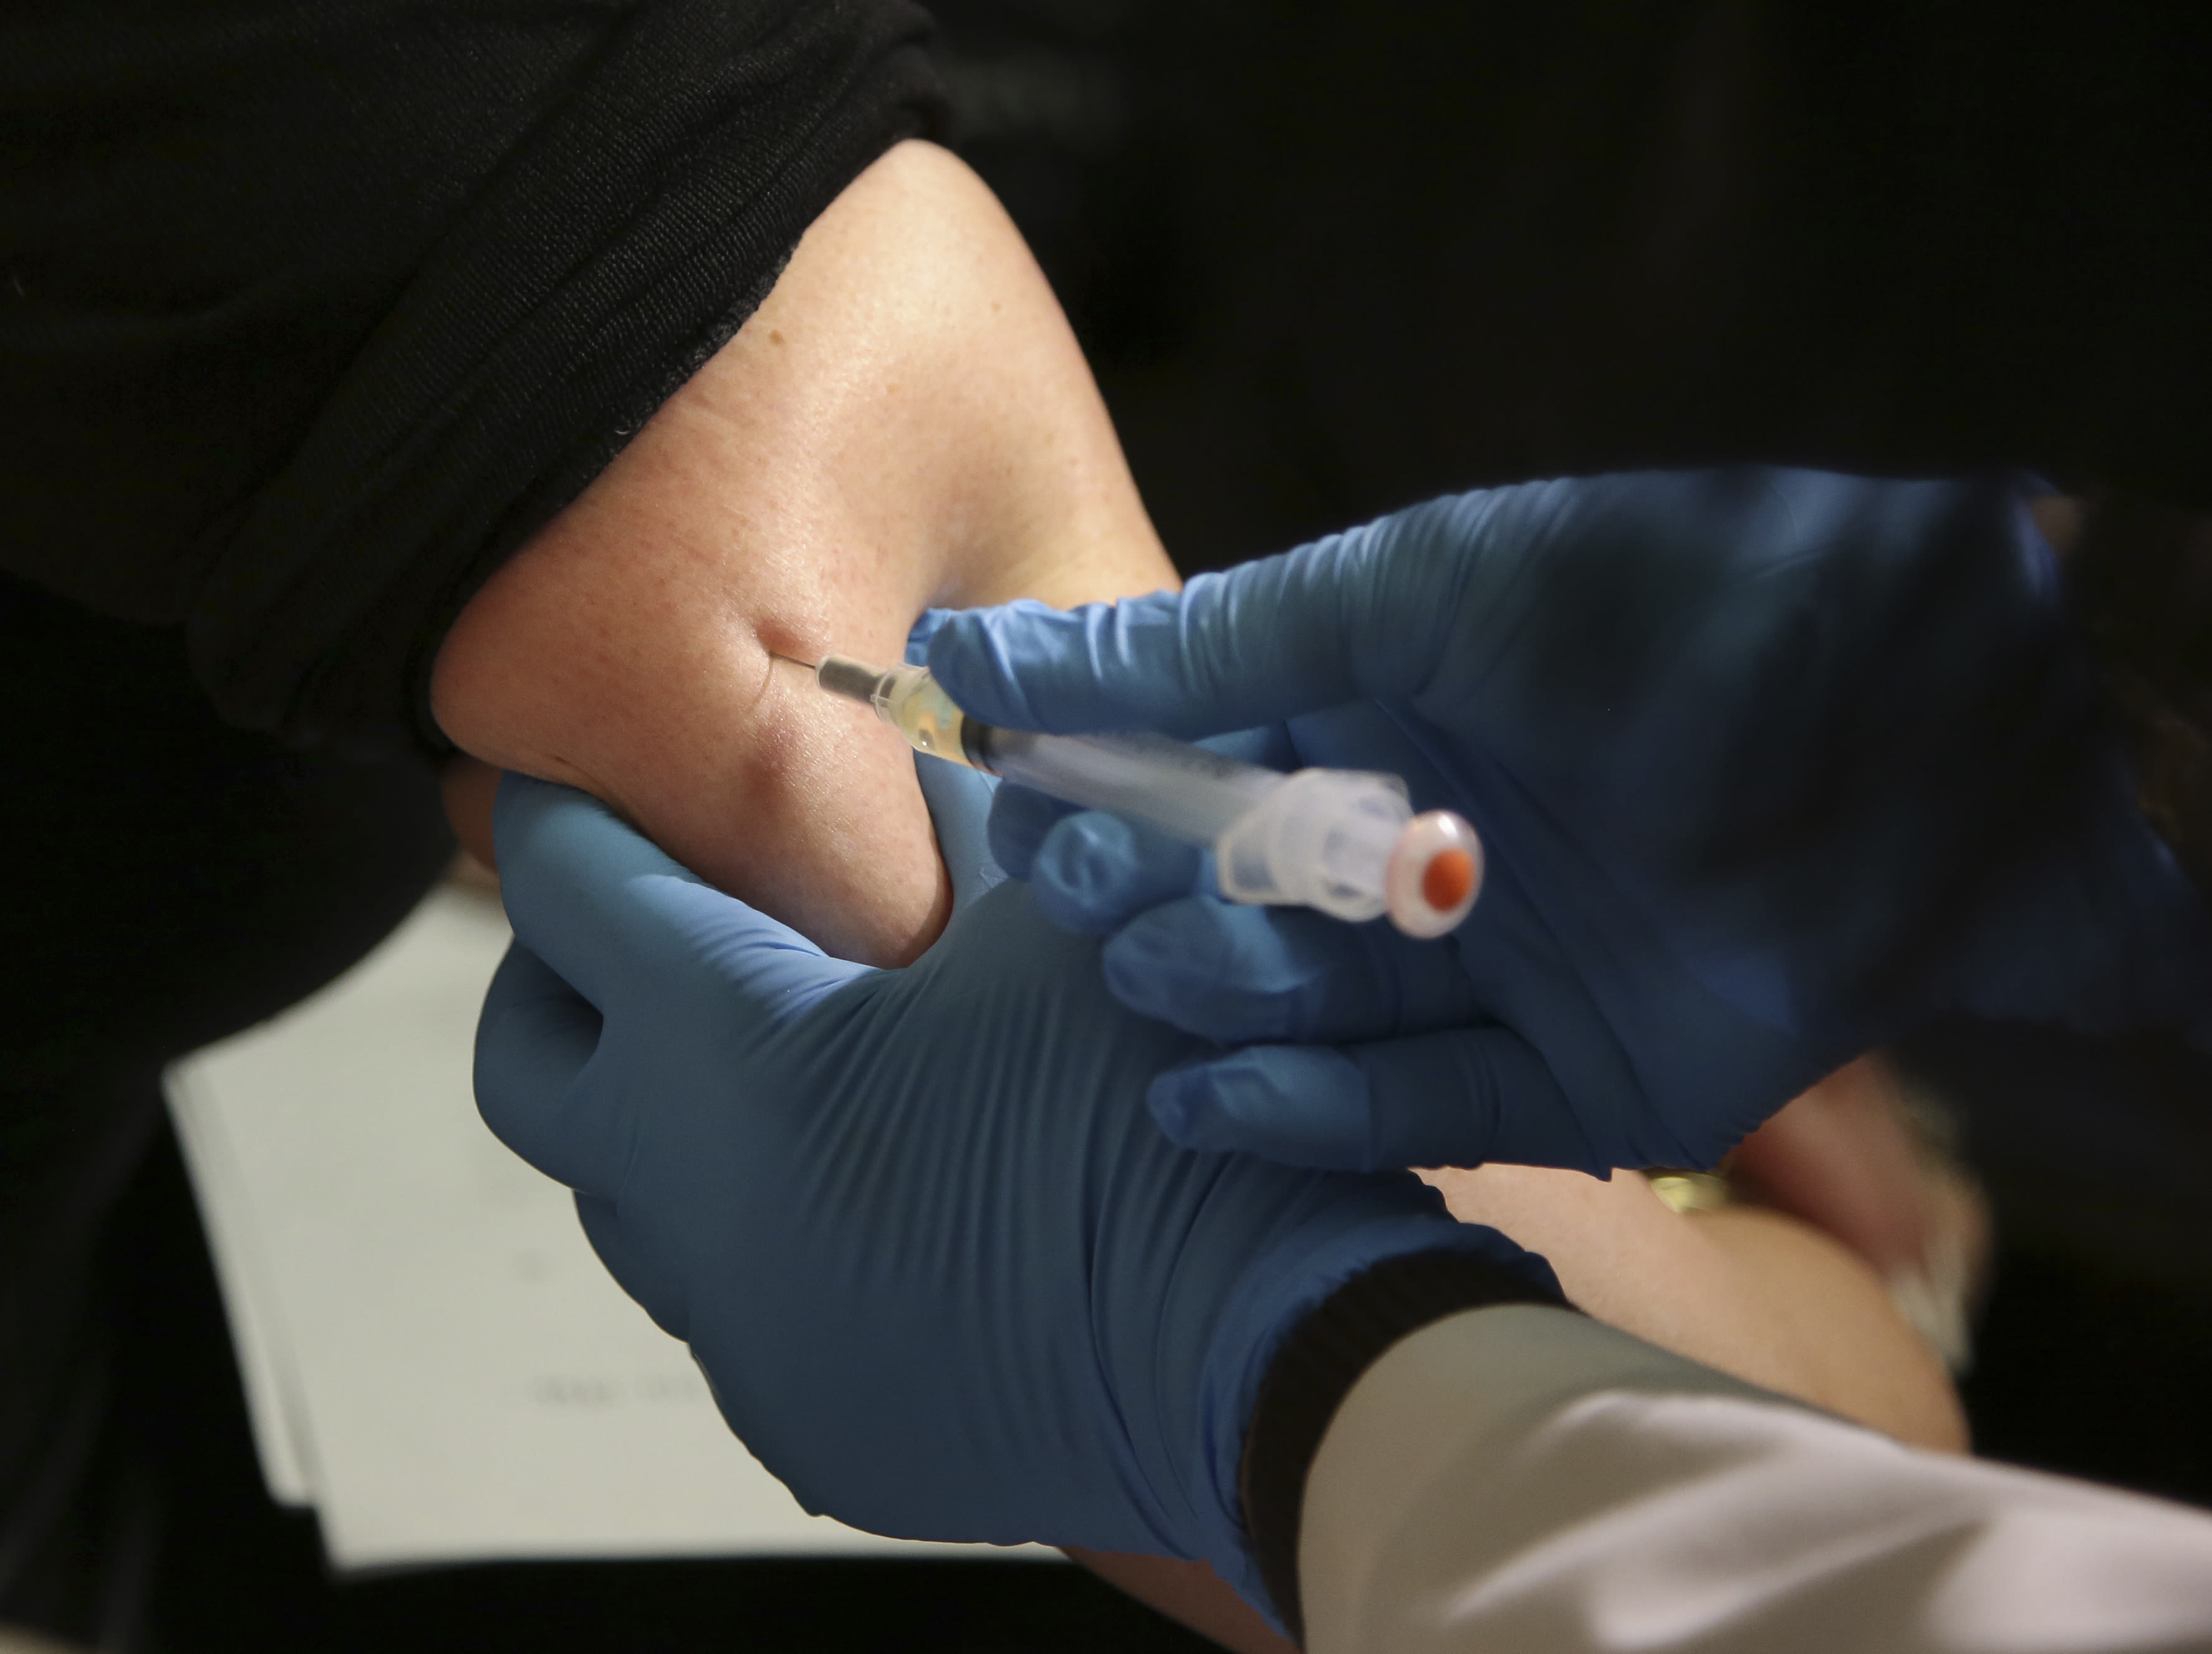 Chicago measles outbreak, worst in the U.S., is over